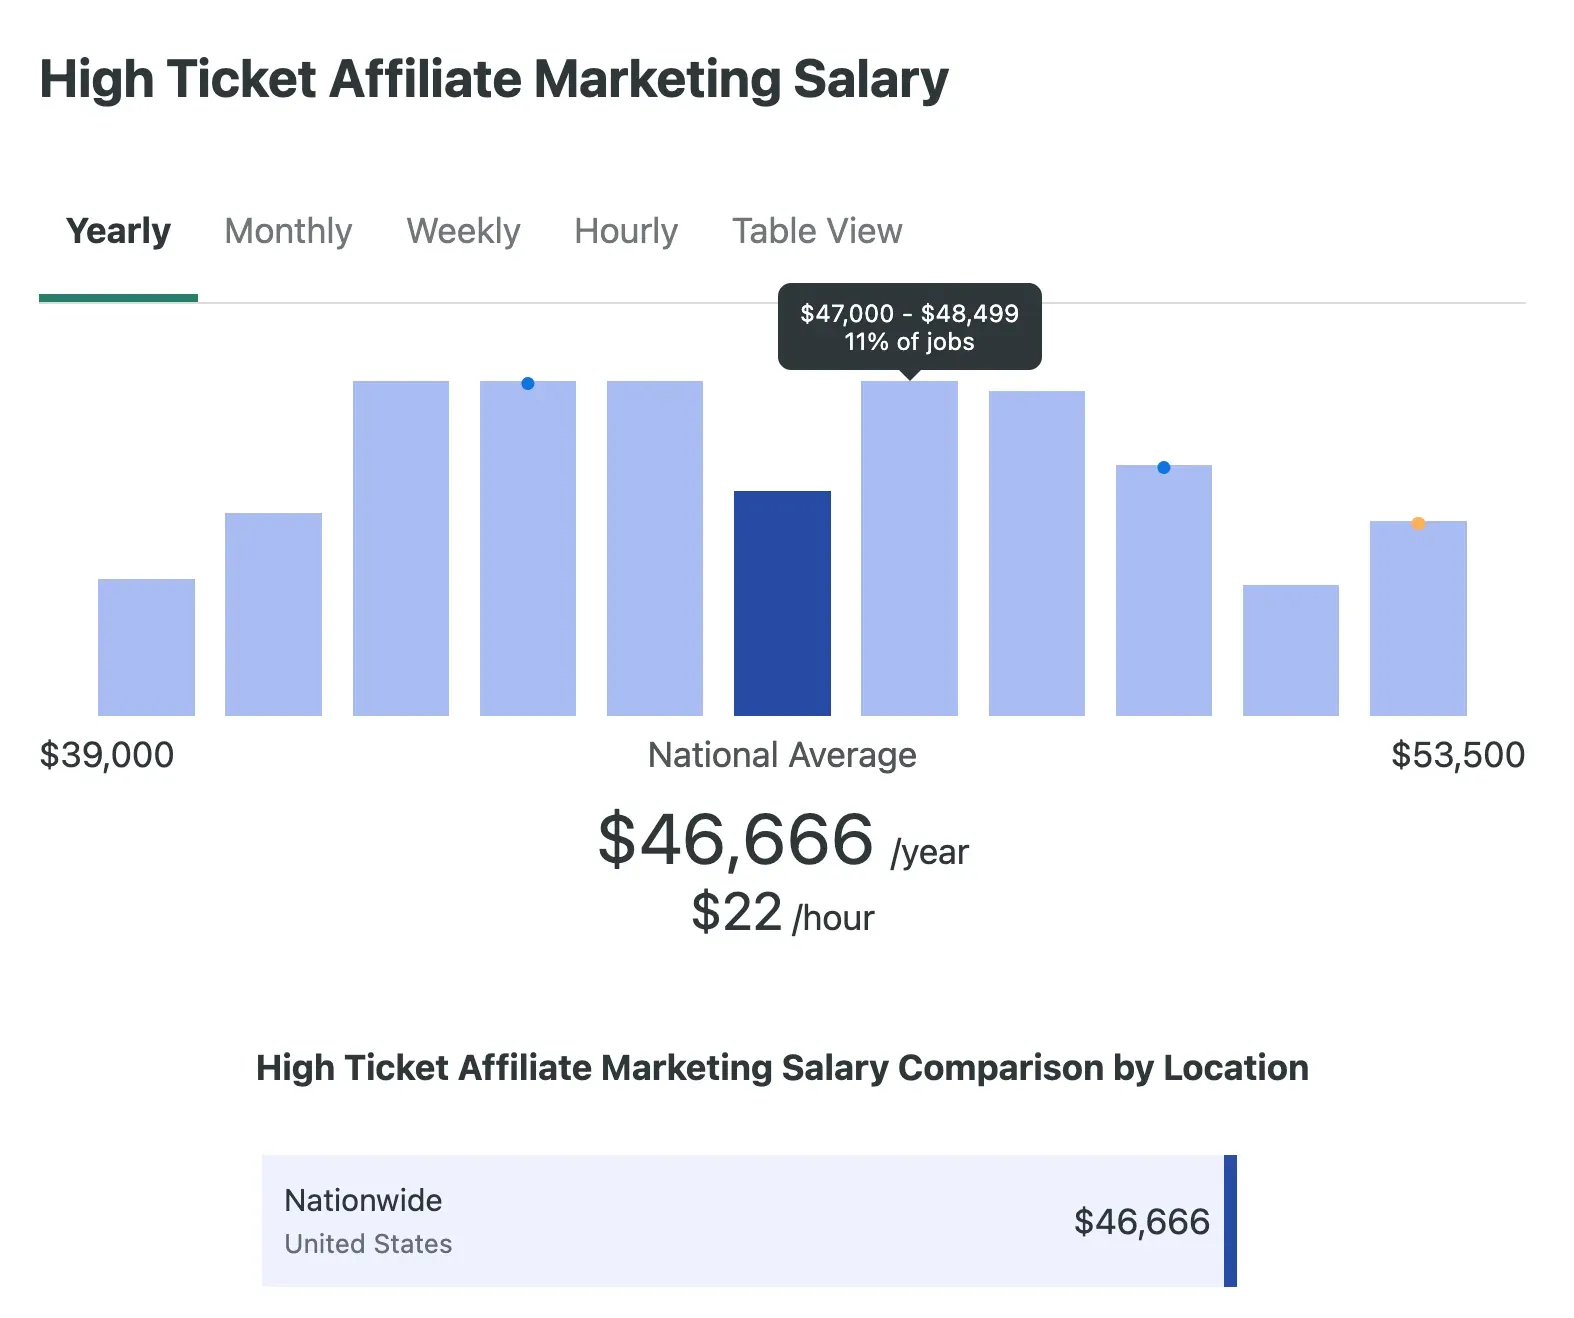 High Ticket Affiliate Programs